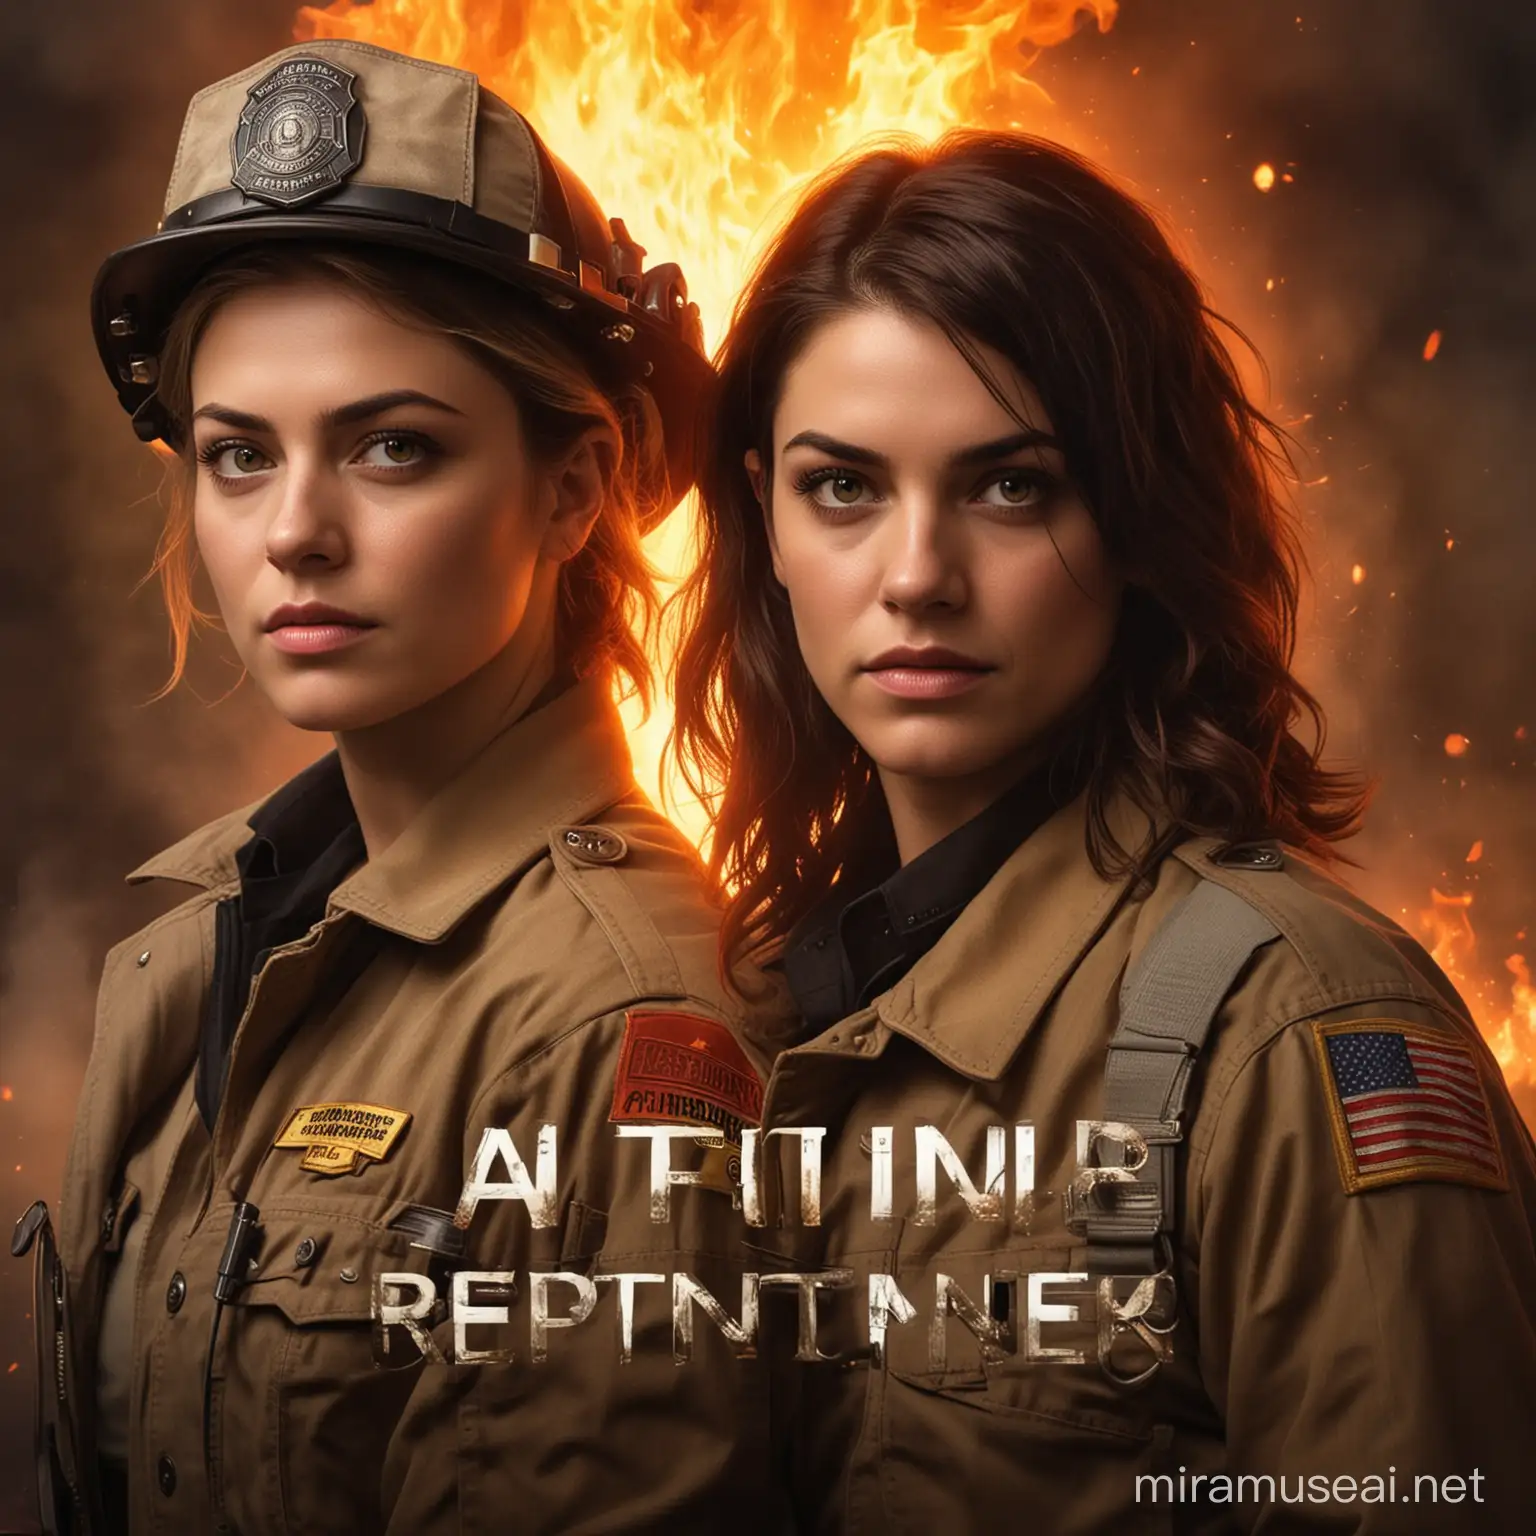 Book cover for a lesbian thriller.

Two FEMALE main characters:
Detective
Captain of the Fire Department

Synopsis of the story: Someone in the fire department is an arsonist, and the lead detective and fire captain of the fire department must work together to figure out who it is.
